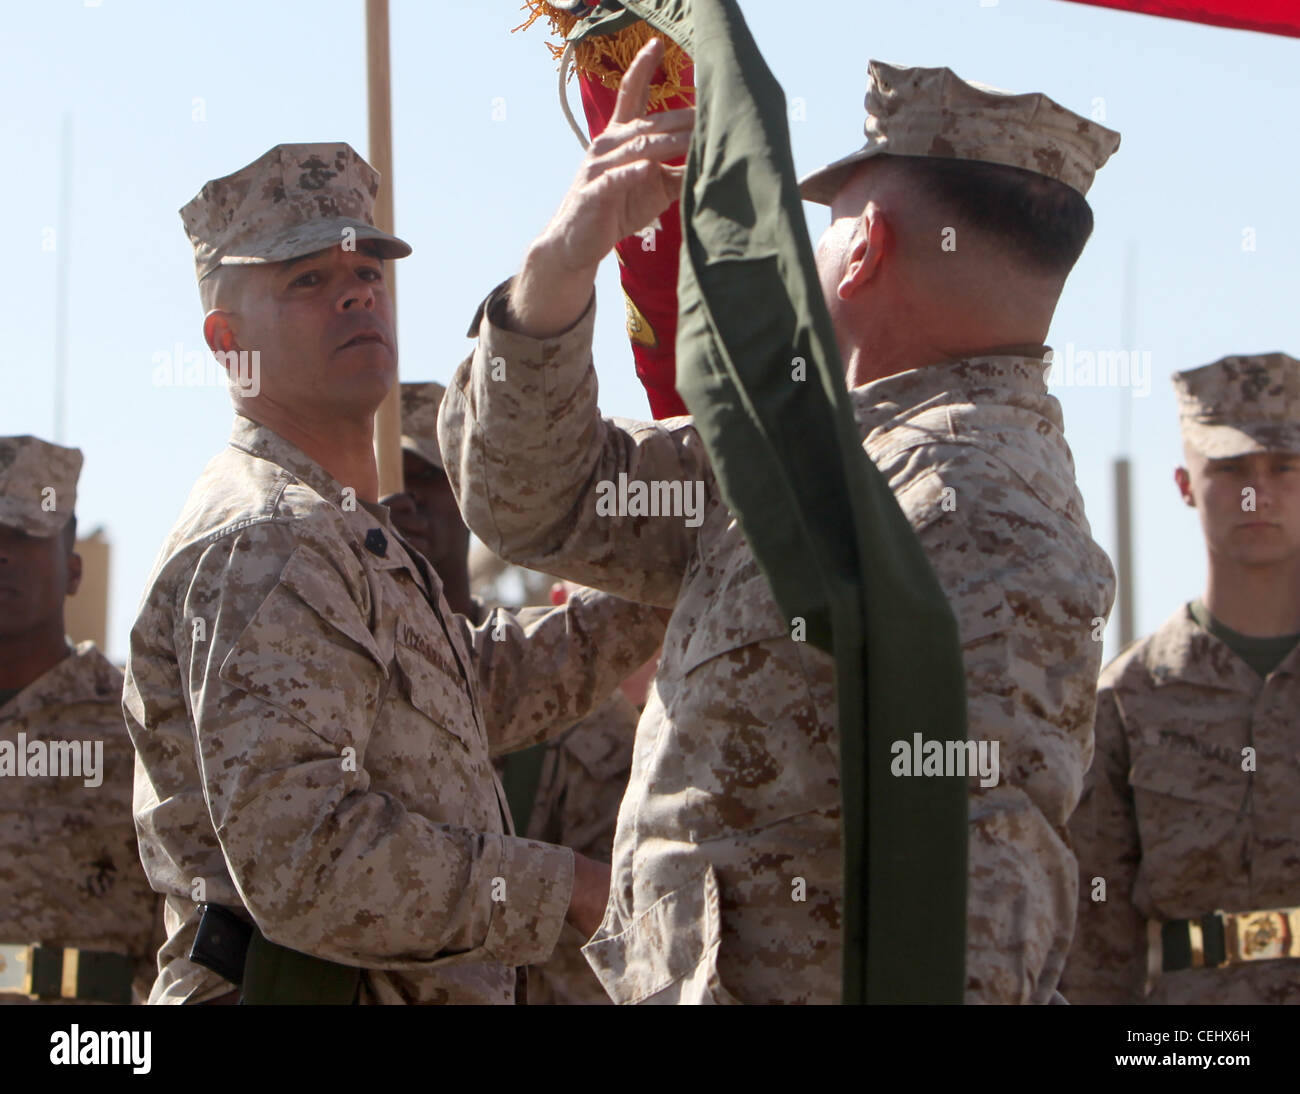 Brig. Gen. John J. Broadmeadow (right), commanding general of 1st Marine Logistics Group (Forward), and Sgt. Maj. Antonio Vizcarrondo (left), the group sergeant major, uncase the unit's colors during a transfer of authority ceremony aboard Camp Leatherneck, Afghanistan, Feb. 15. For the next year, 1st MLG (FWD) will serve as the Logistics Combat Element in southern Afghanistan Stock Photo